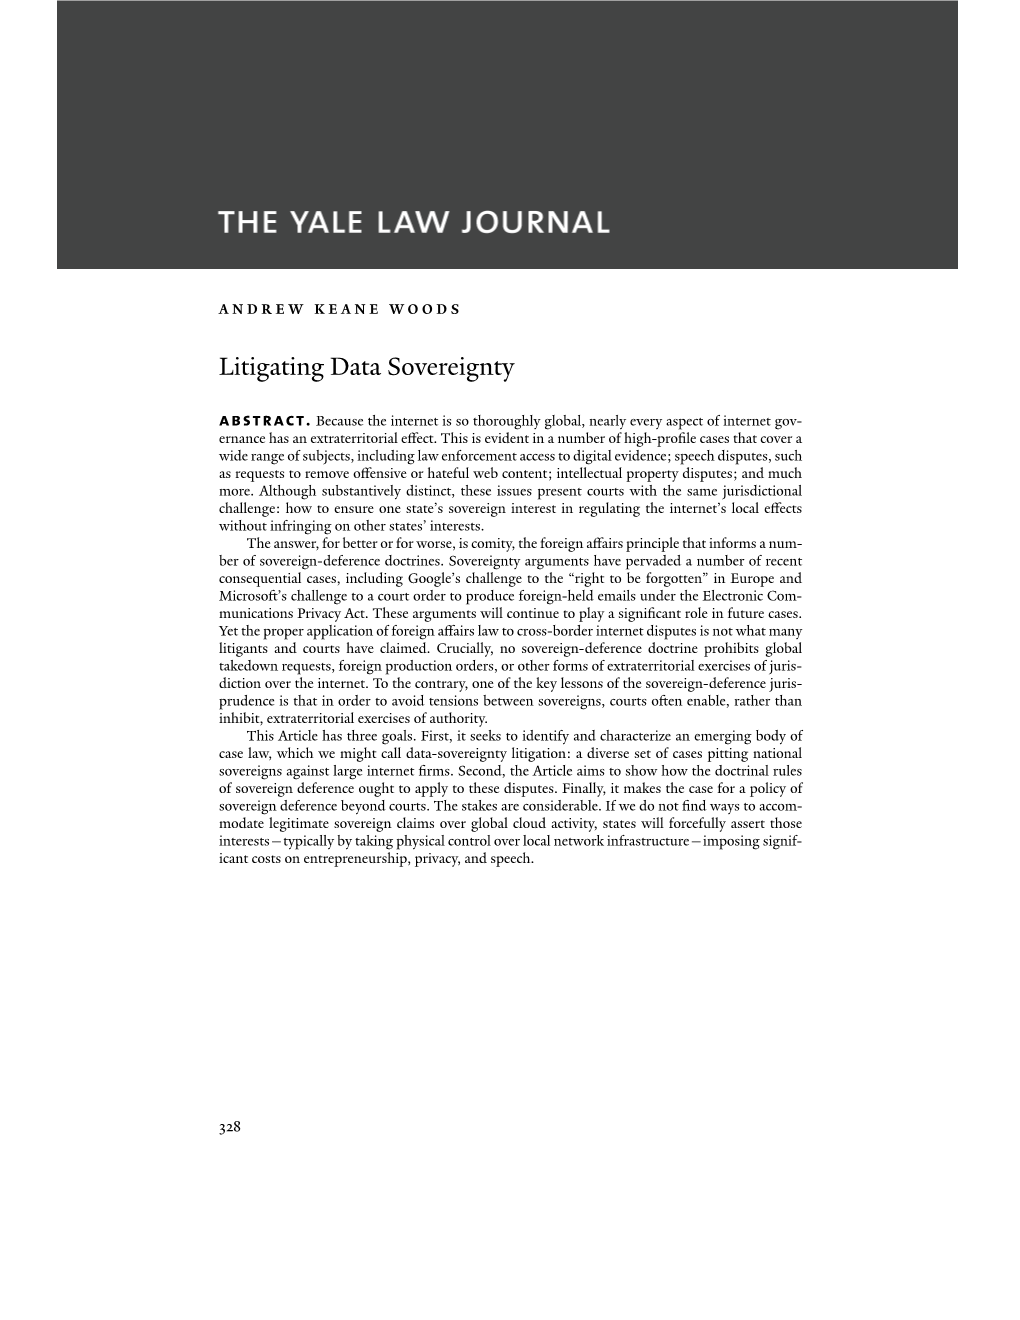 Litigating Data Sovereignty Abstract